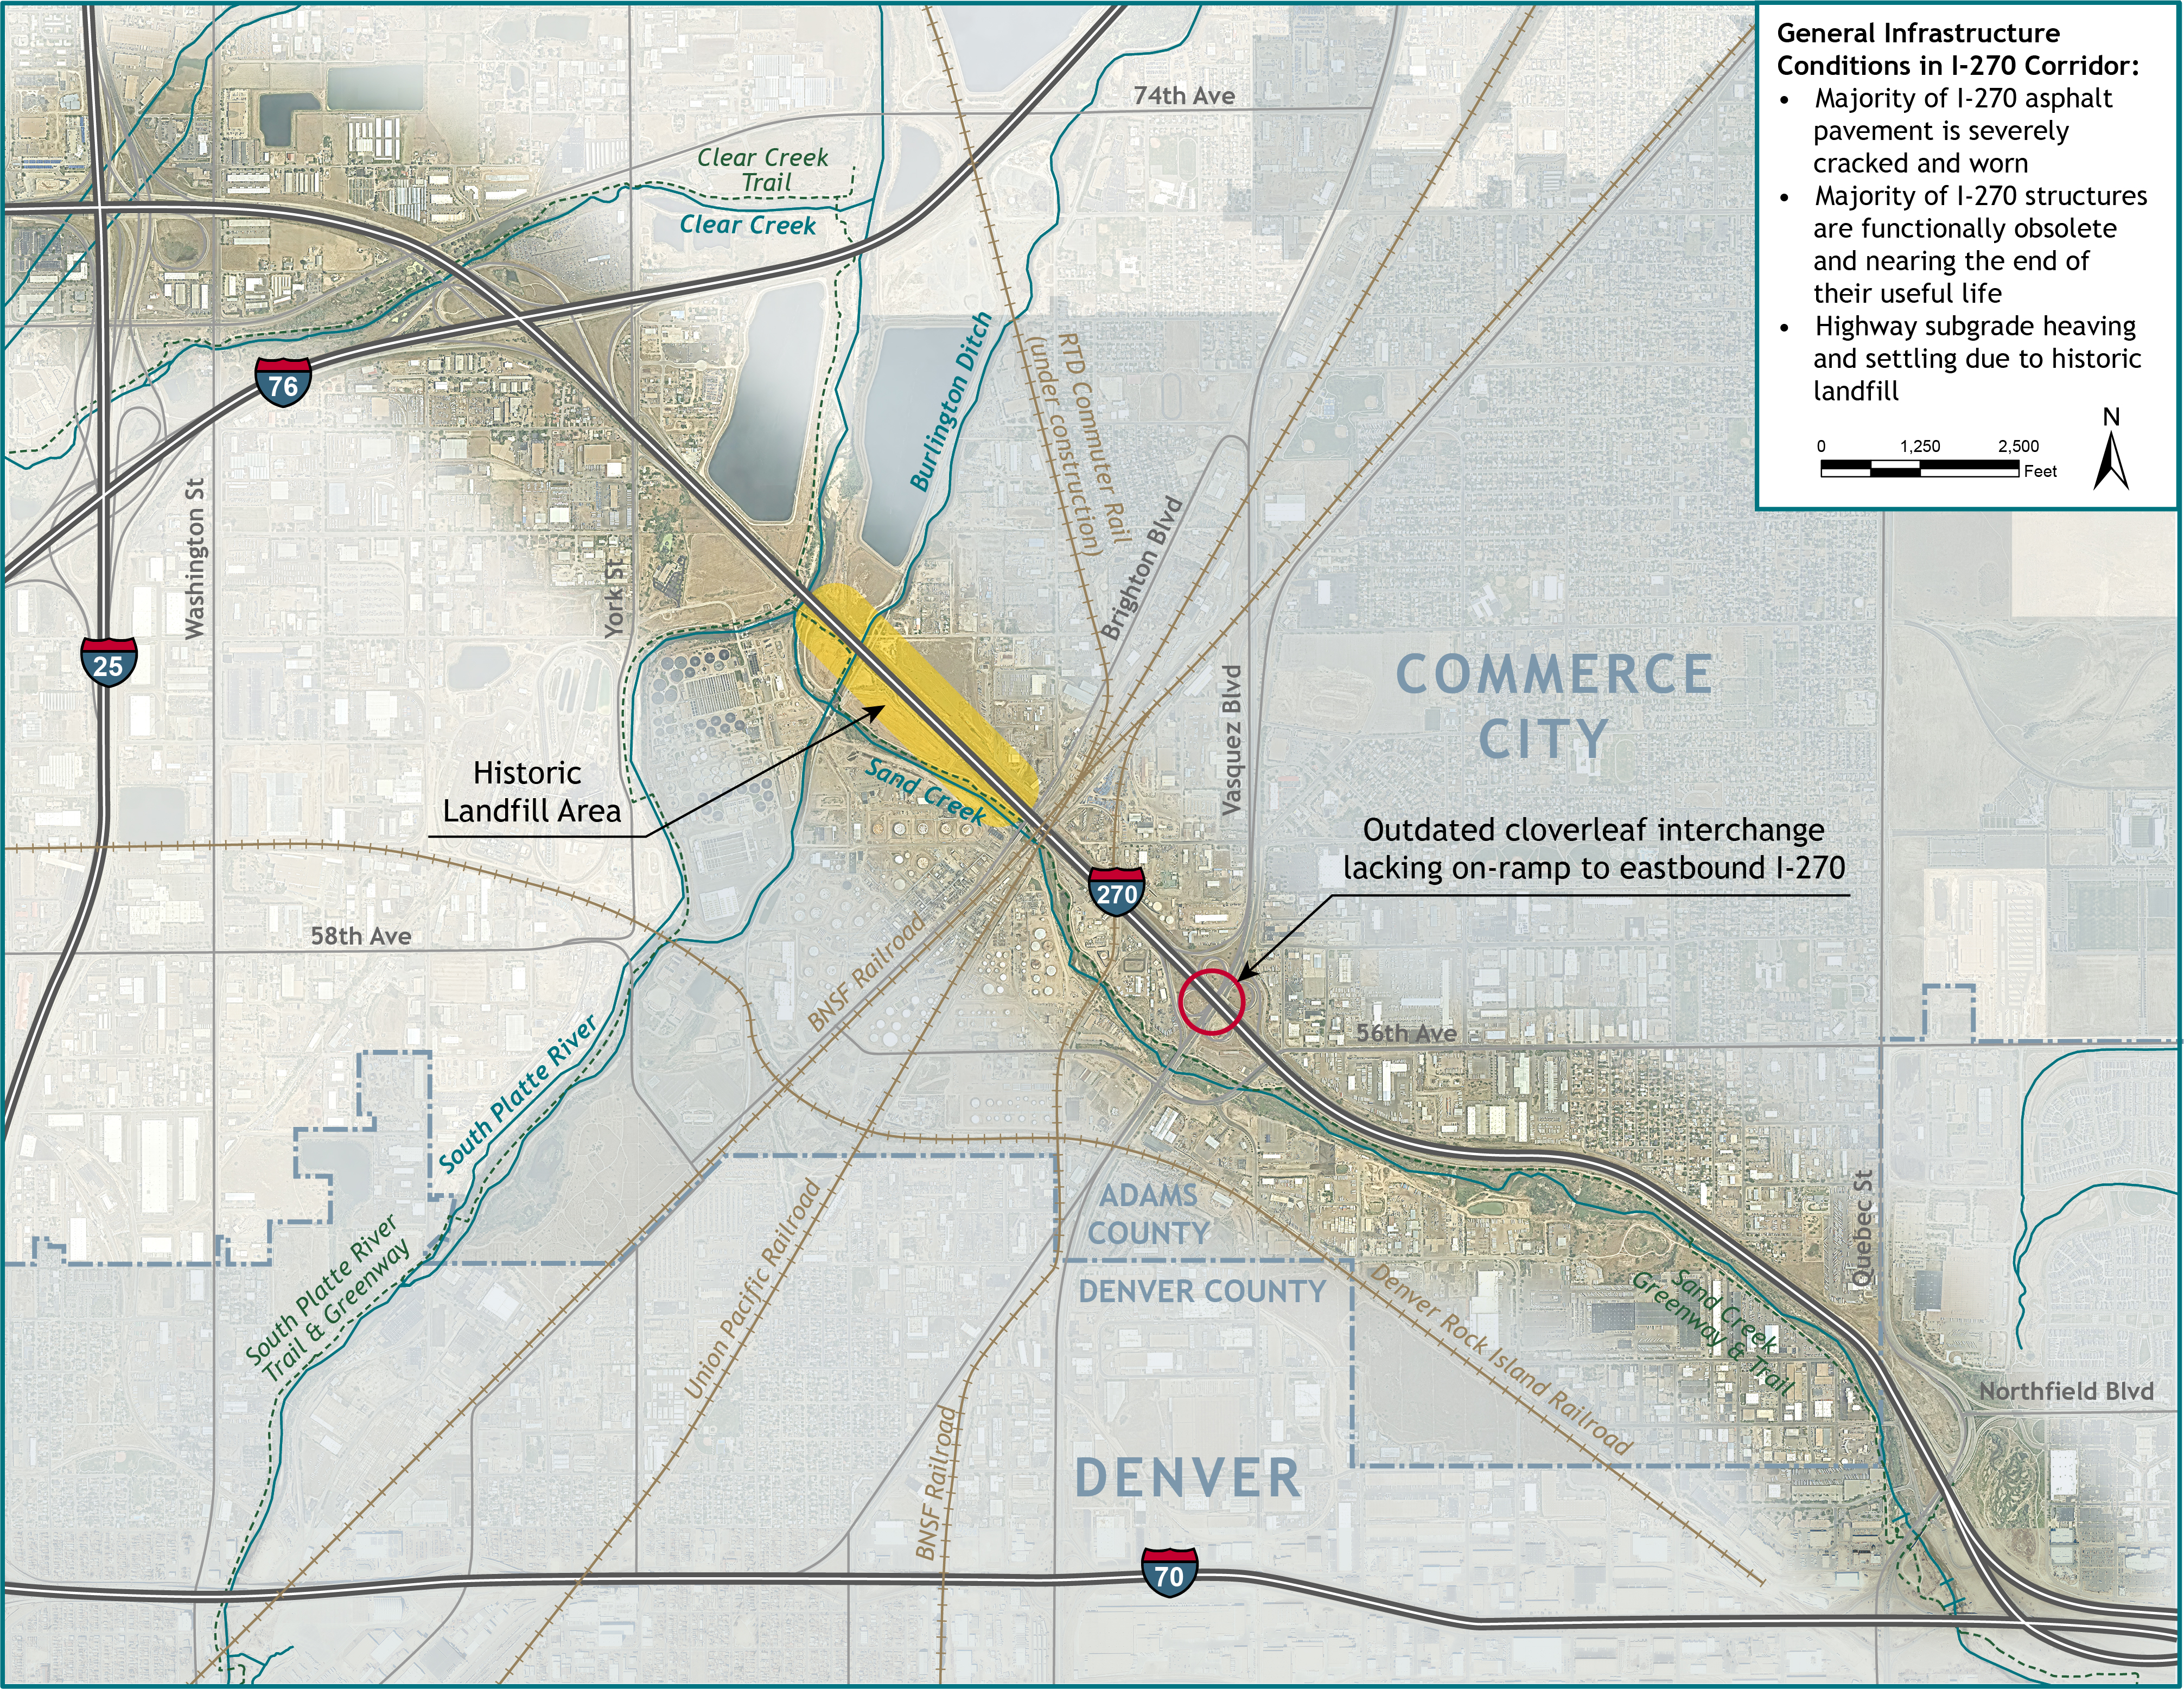 Existing Infrastructure Issues in the I-270 Corridor